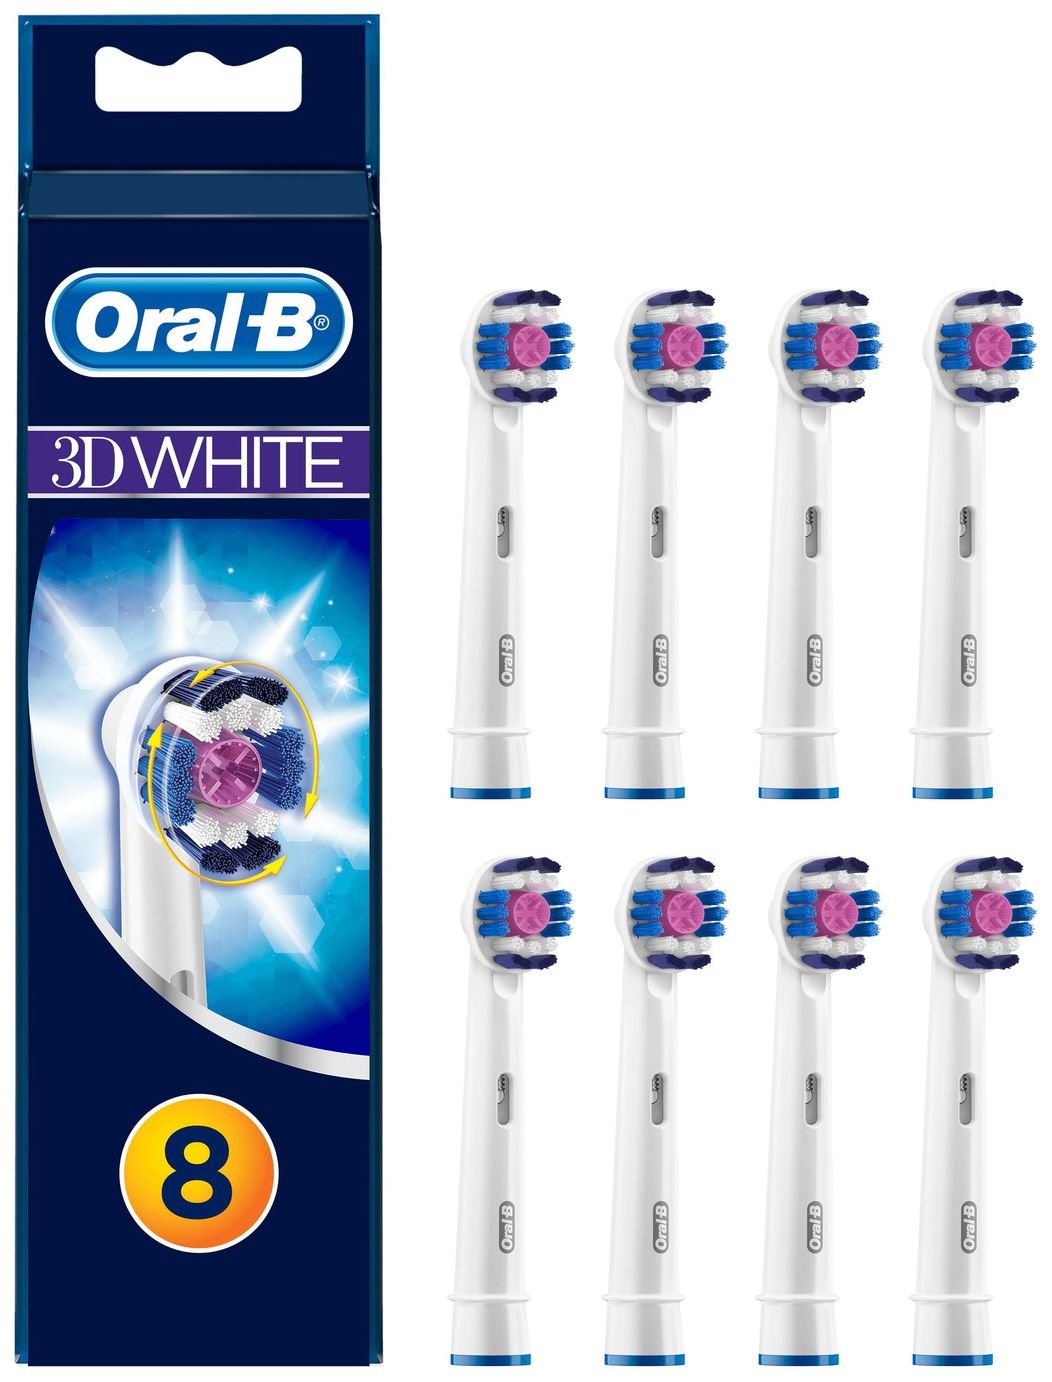 Oral-B 3DWhite Electric Toothbrush Heads - 8 Pack